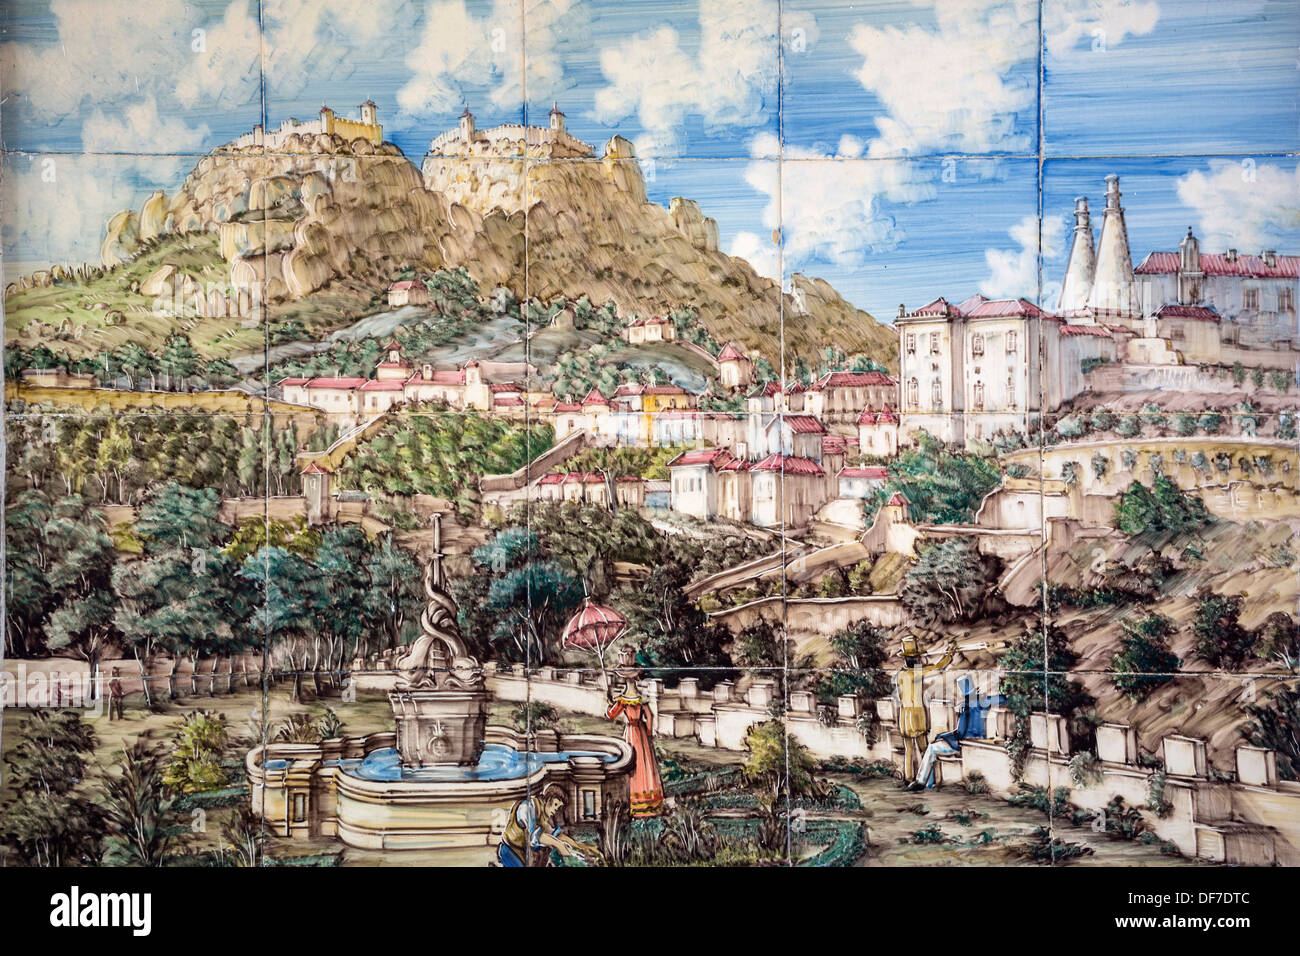 Azulejos tile image of the Castelo dos Mouros, Castle of the Moors, Moorish fortress, Sintra, Lisbon District, Portugal Stock Photo